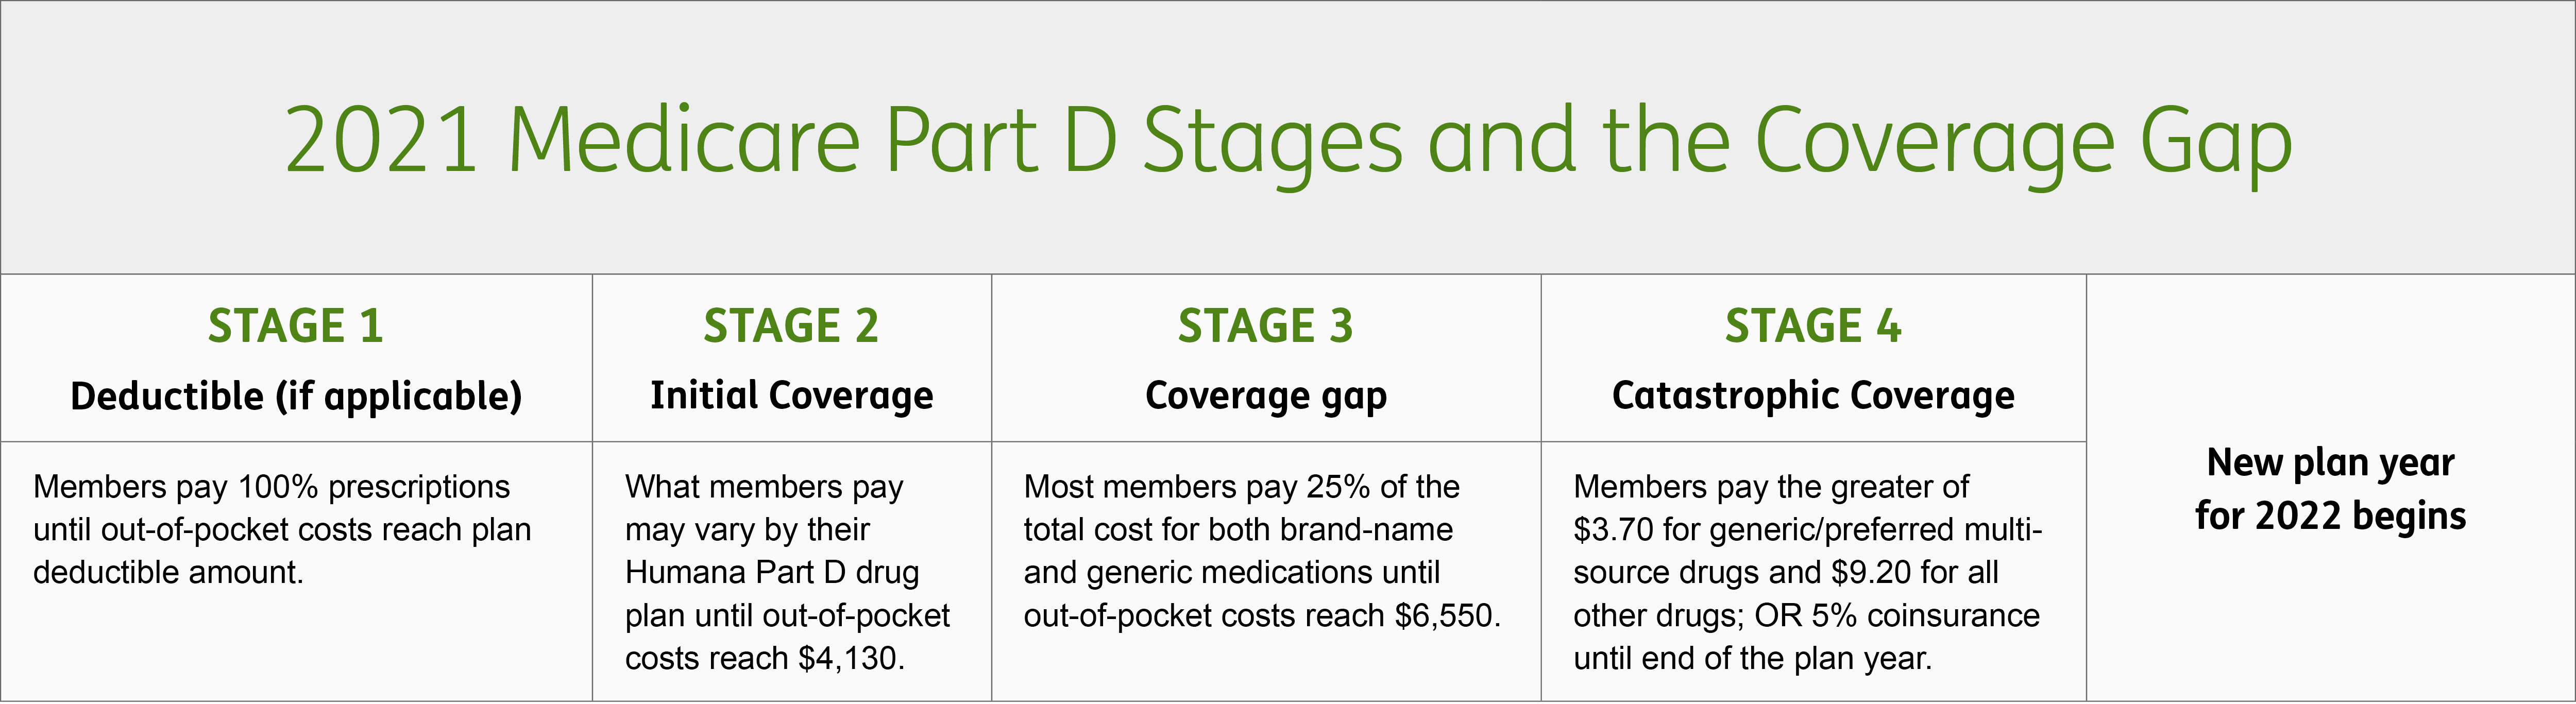 A chart with the 4 stages of Medicare Part D coverage